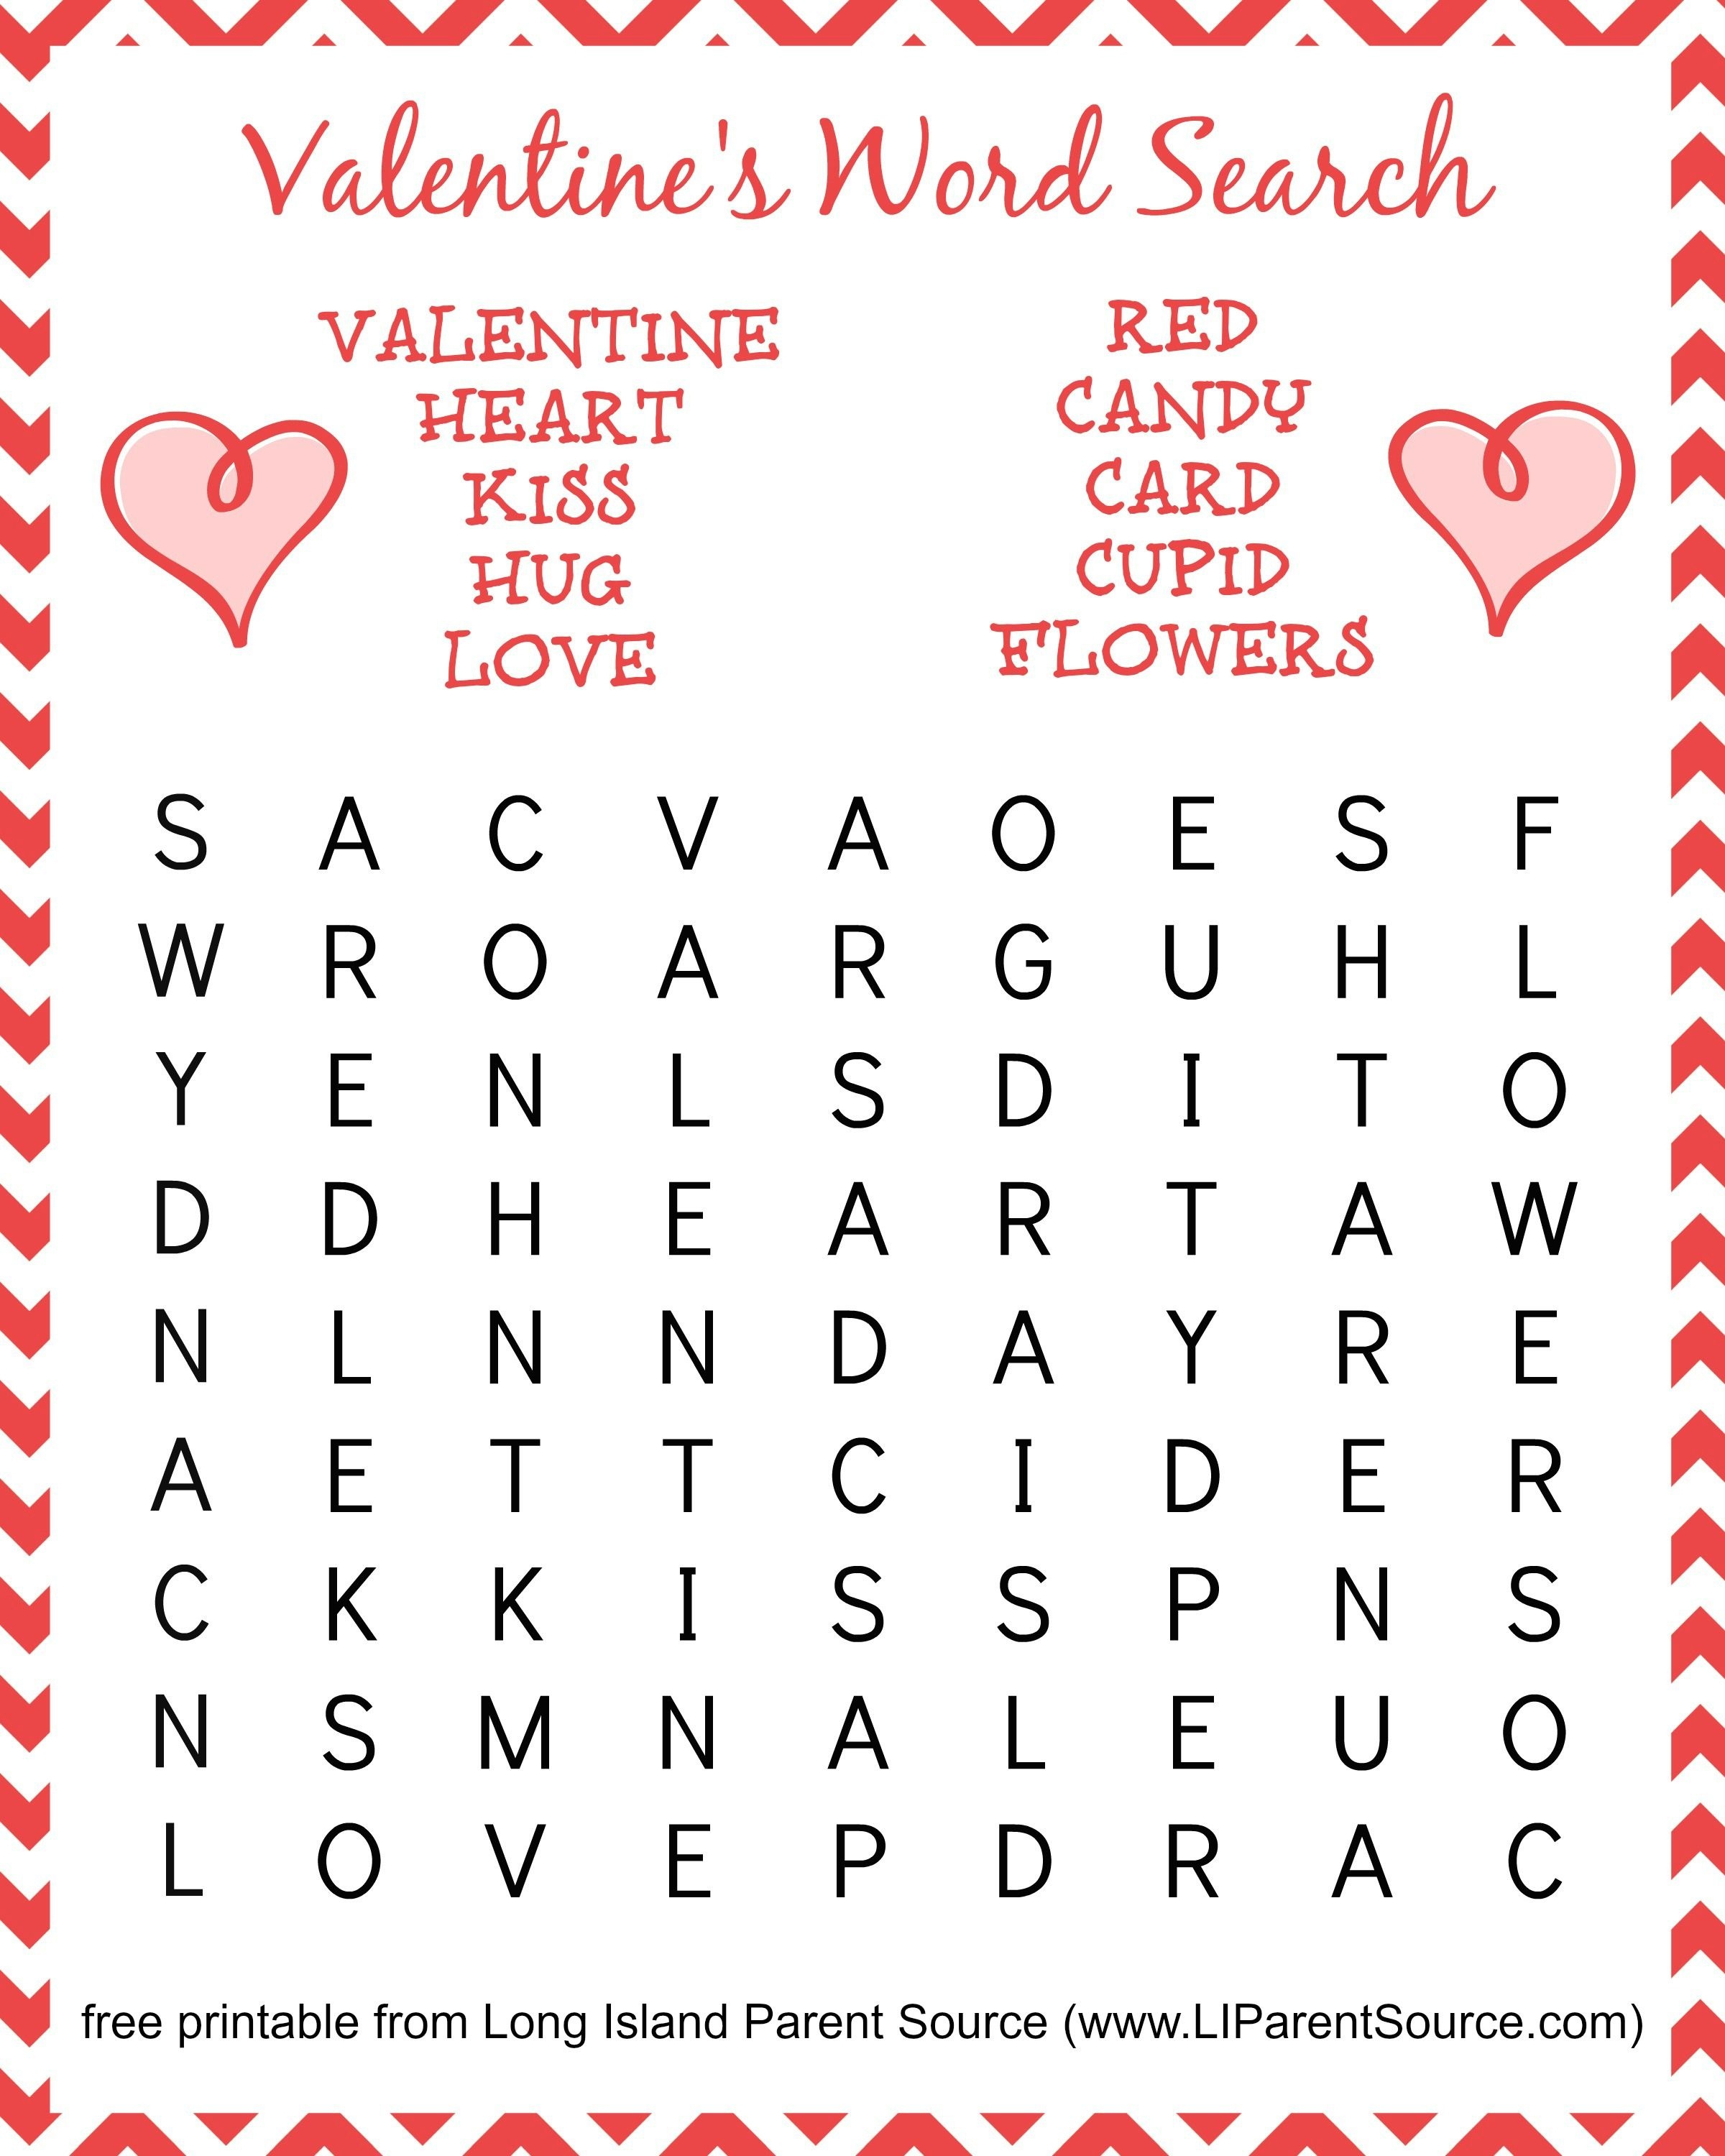 Valentine's Day Free Printable Word Search Crafts For Kids - Free Prin...